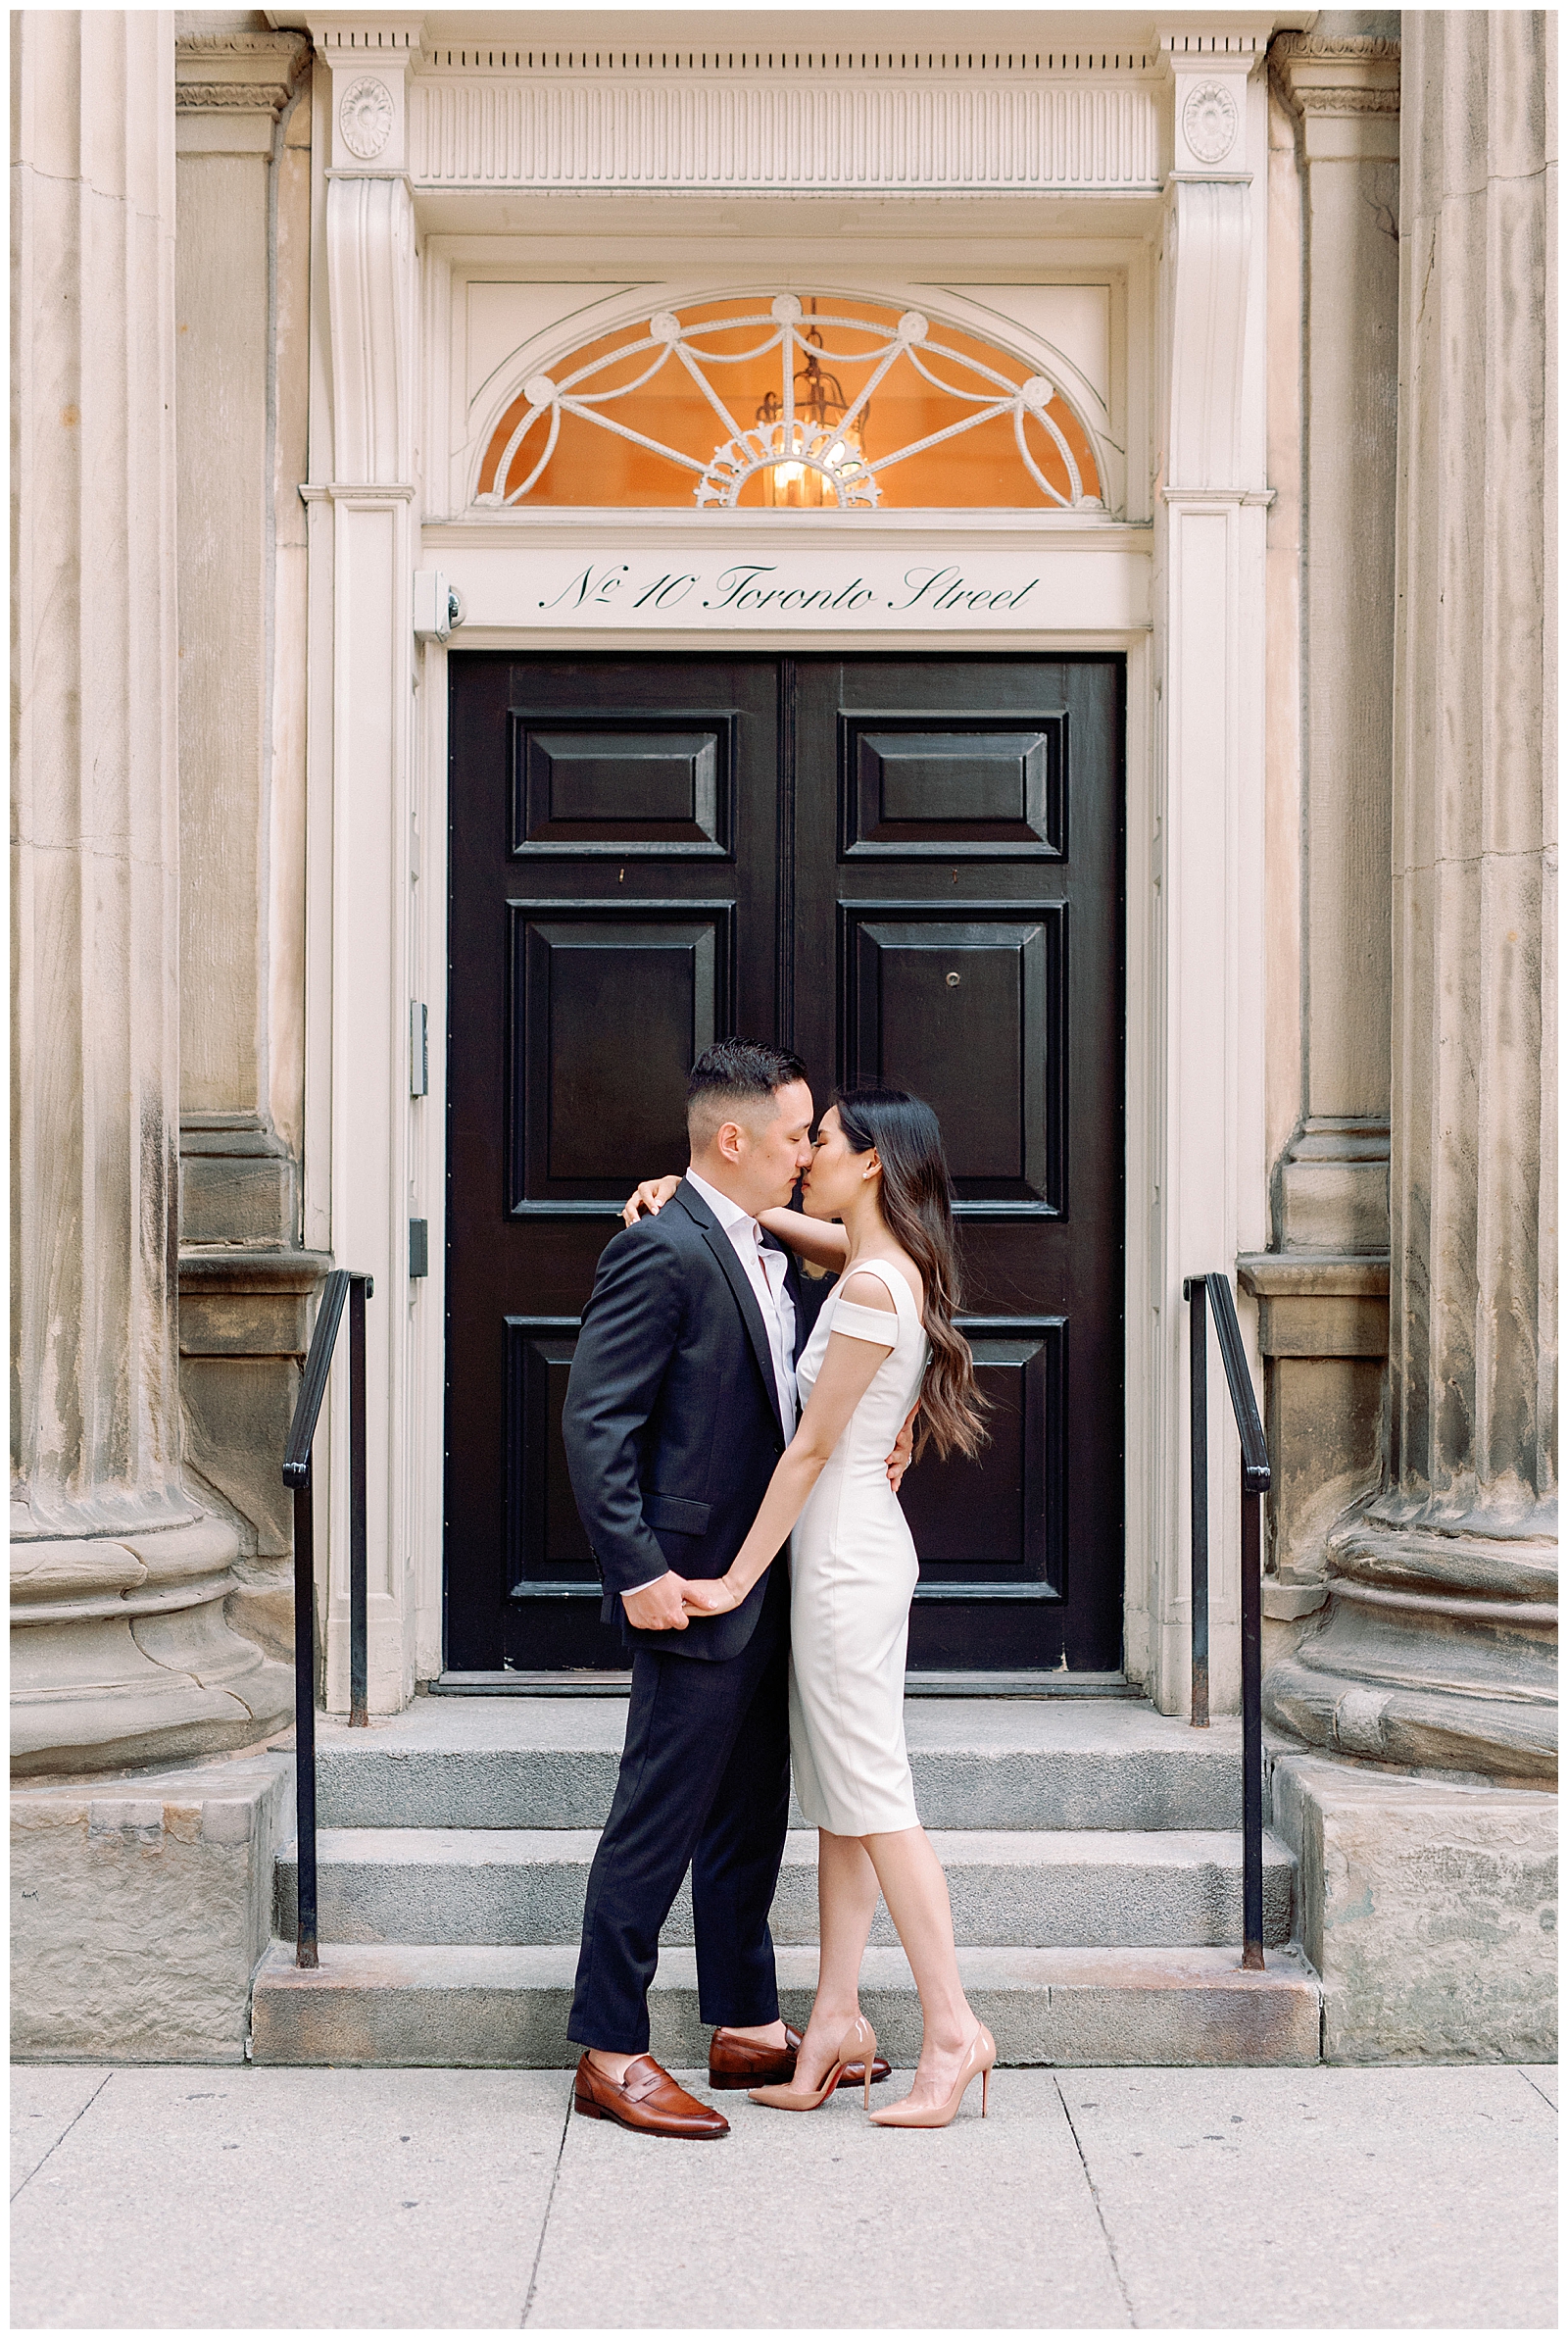 Downtown Toronto Financial District Engagement Session Modern Chic Timeless Couple Embracing in Front of Beautiful Door | Toronto Wedding Photography Jacqueline James Photography